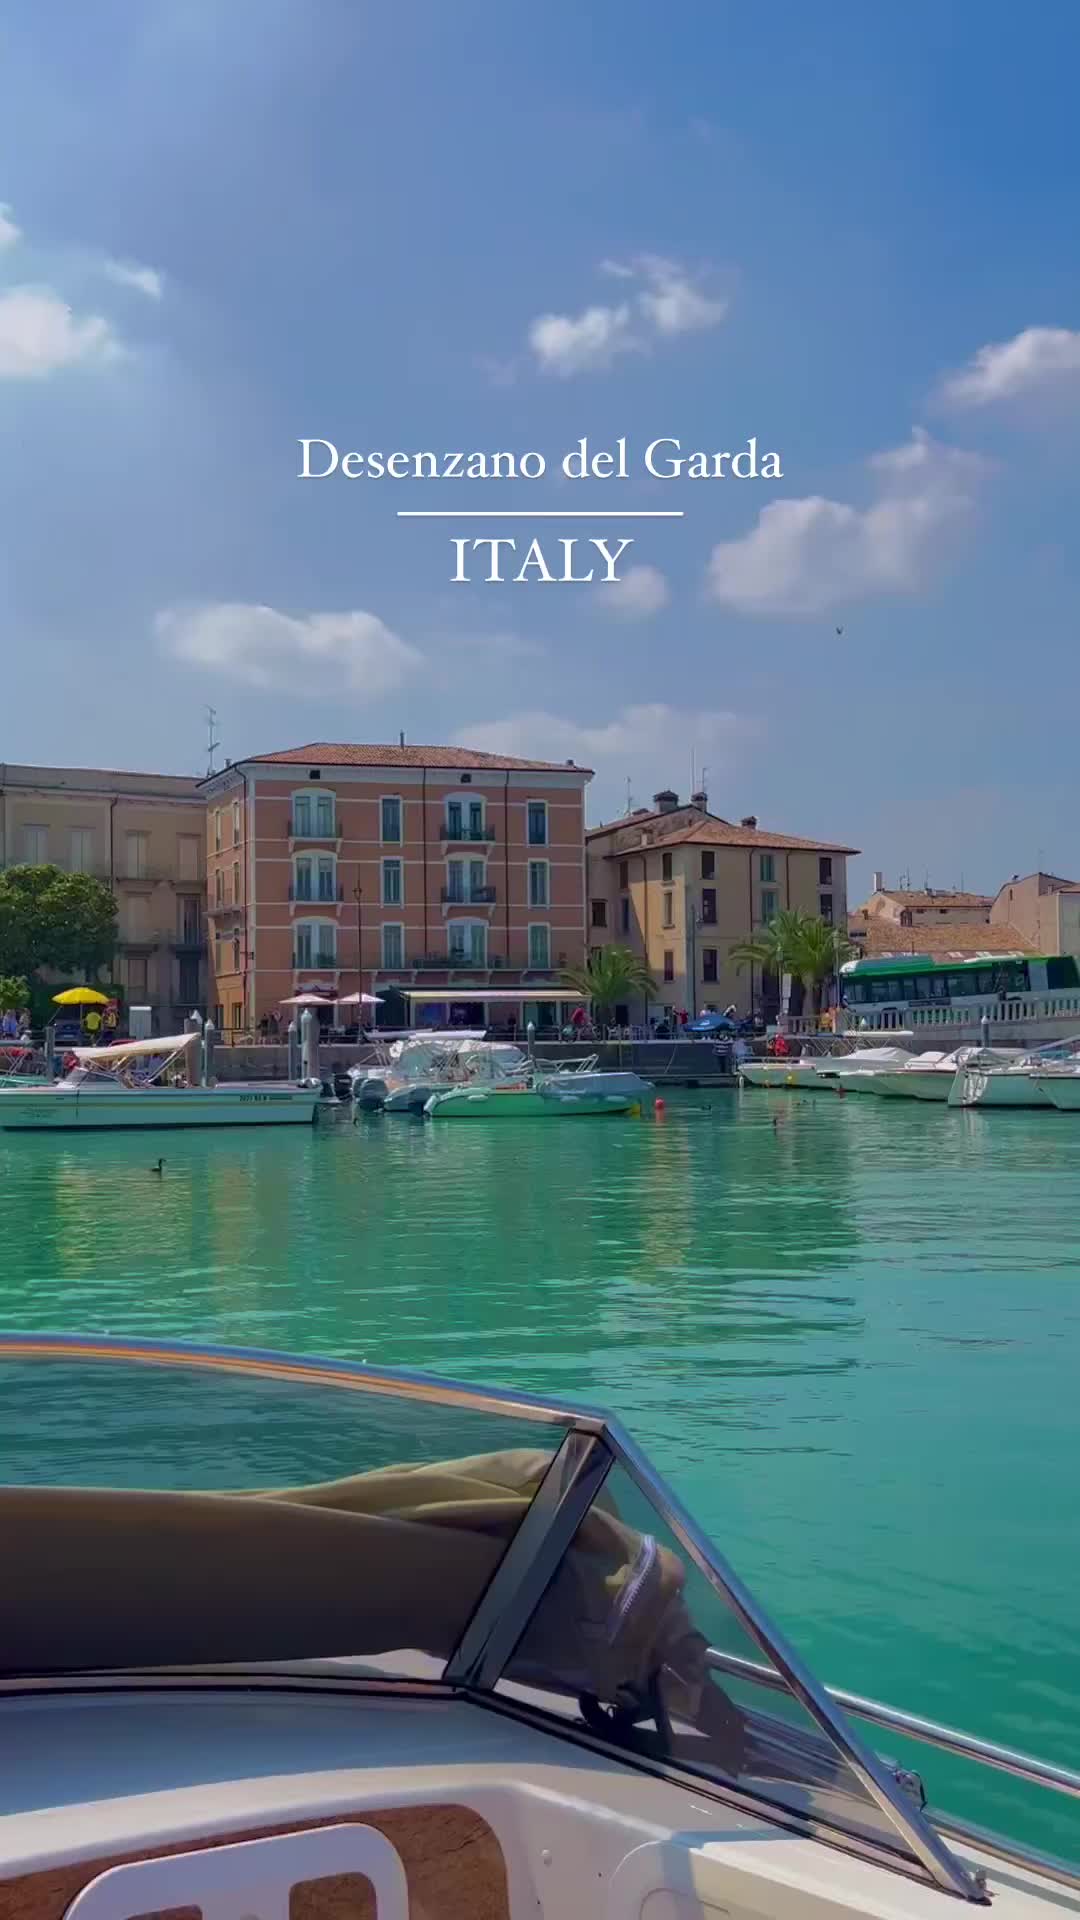 What’s your favourite place at Lago di Garda? ☀️ I had a wonderful weekend at Desenzano del Garda - perfect weather, Italian food & a lovely scenery! What else do you need?

If you‘ll ever visit this place, book a boat trip and enjoy a beautiful day on the water. 😎

📍Desenzano del Garda, Italy

📸 Video taken by @wonderfultraveltime 

#desenzanodelgarda #lagodigarda #gardalake #italia #italy #travel #beautifuldestinations